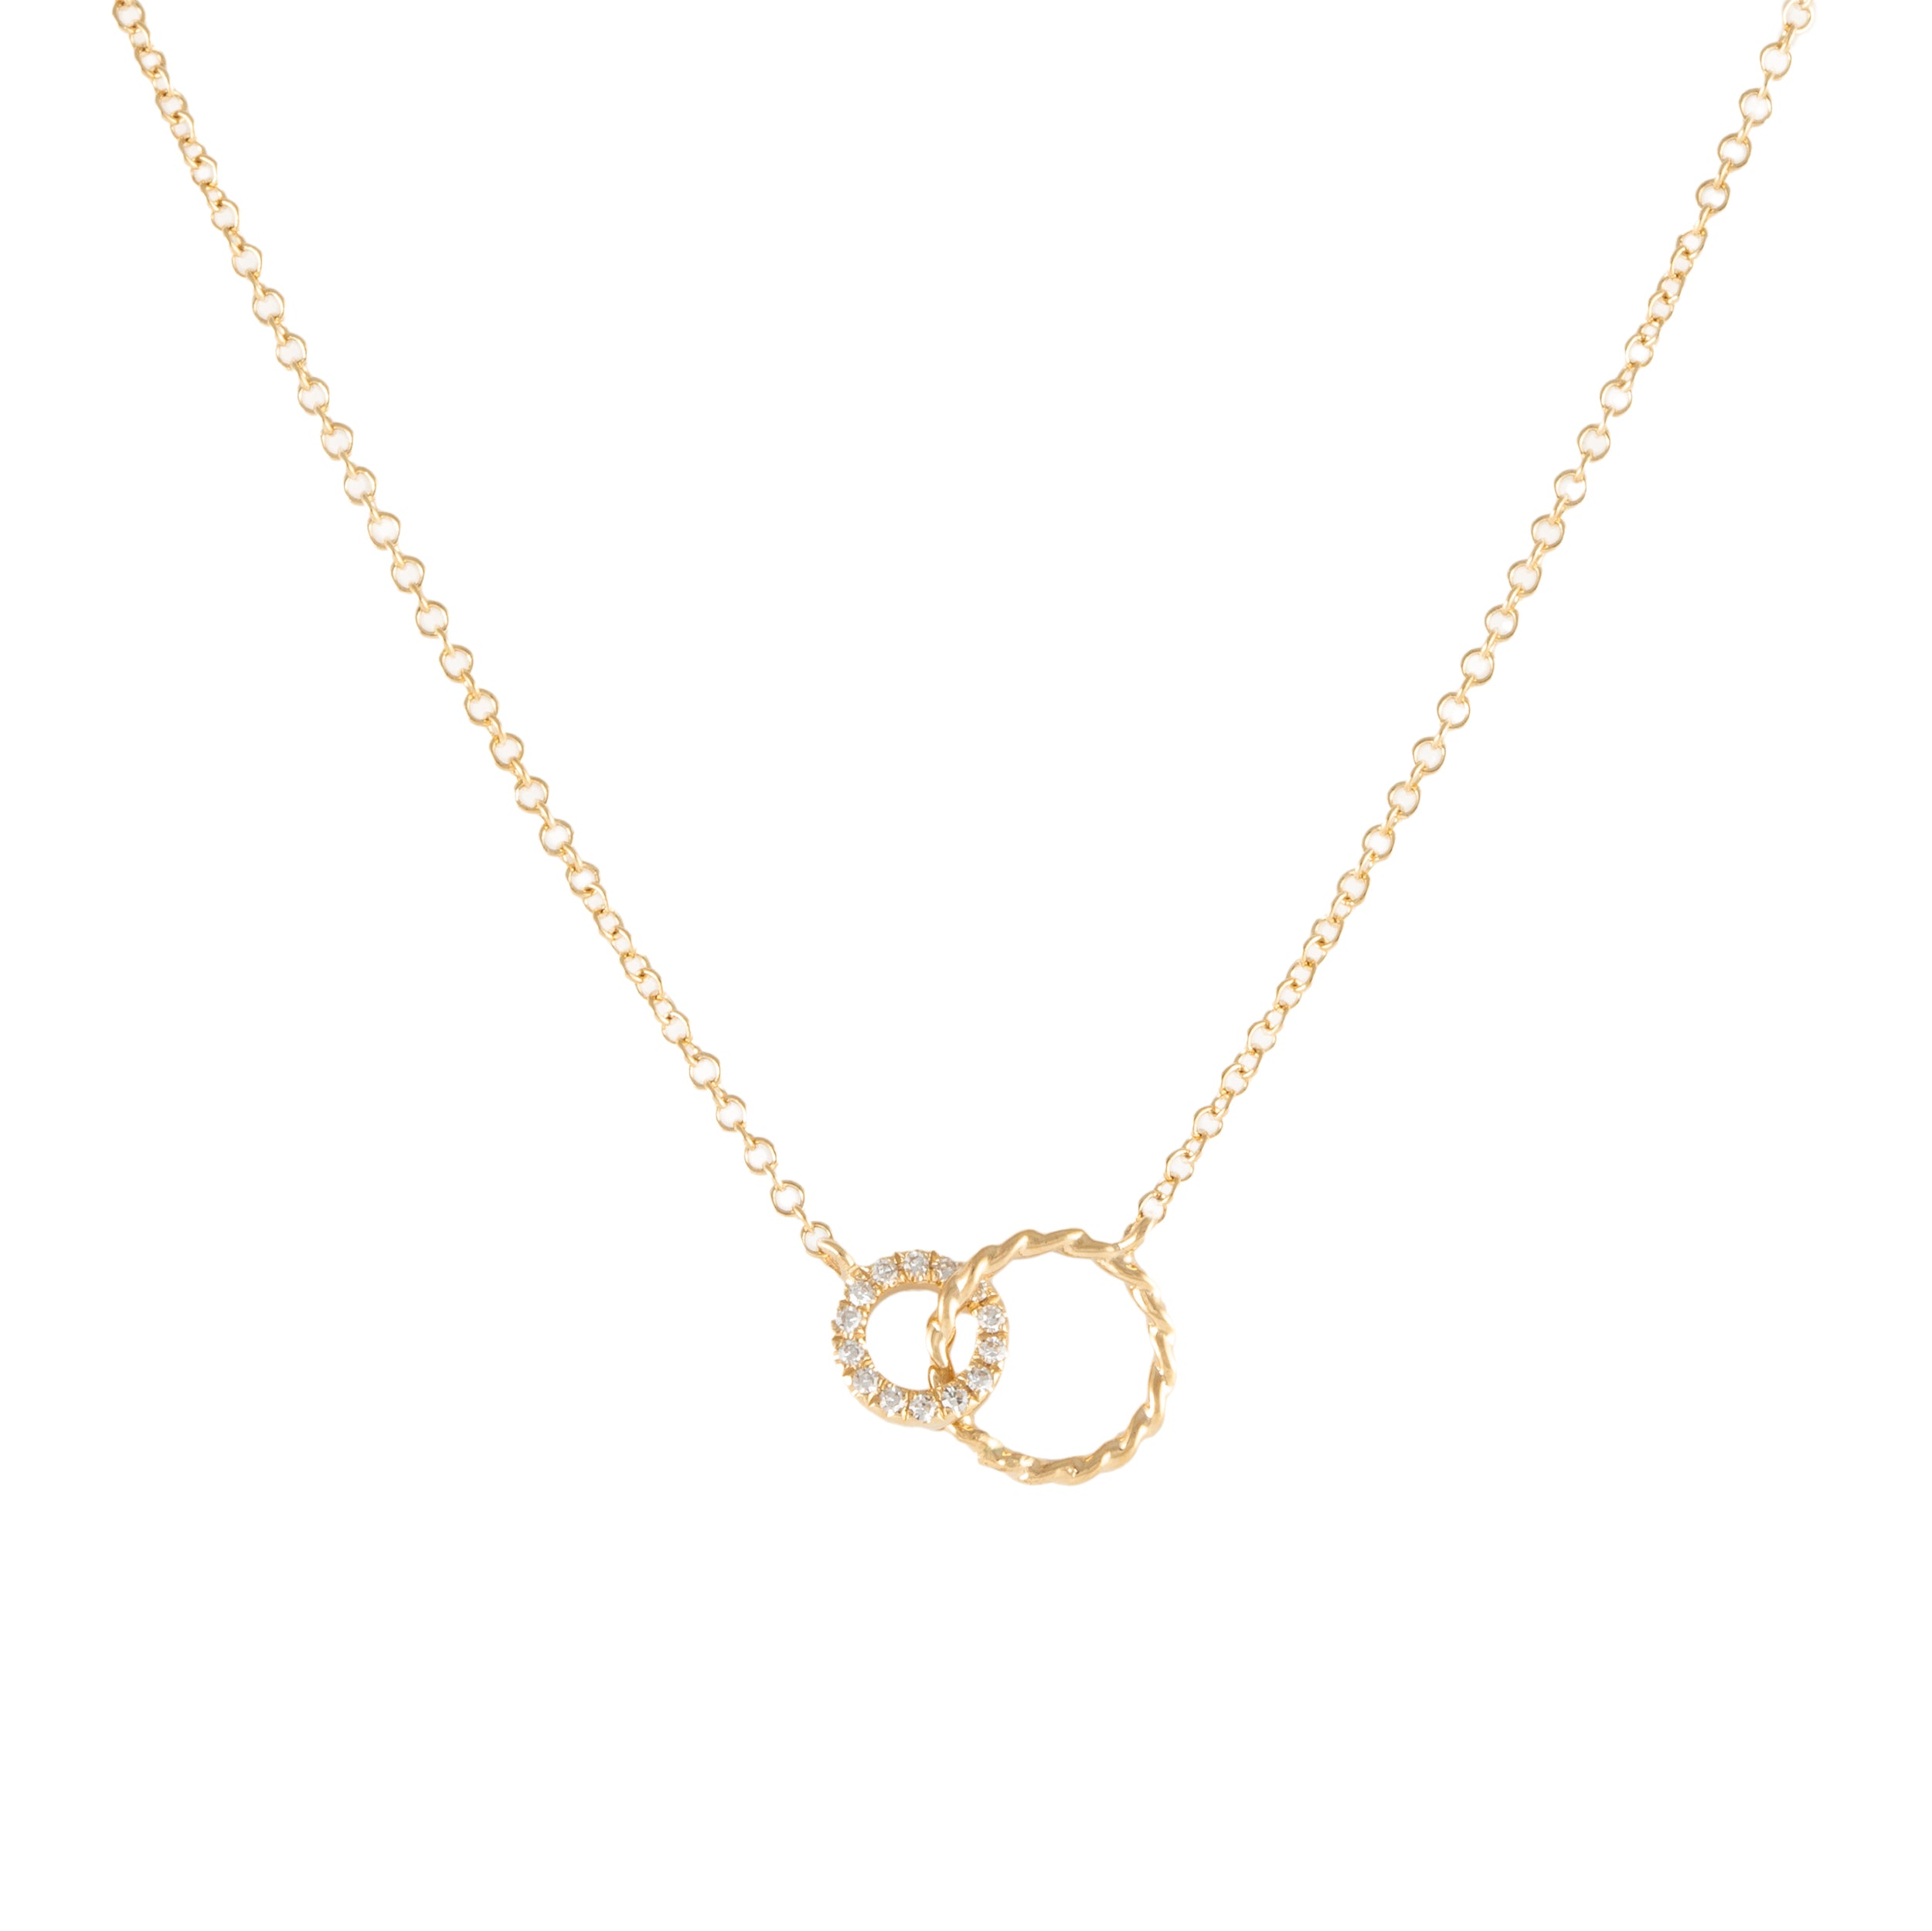 Sister Necklace 14K Gold Fill, 925 Silver, Interlocking Circle Necklace,  Infinity Necklace, Two Circle Necklace, Sister Jewelry - Etsy